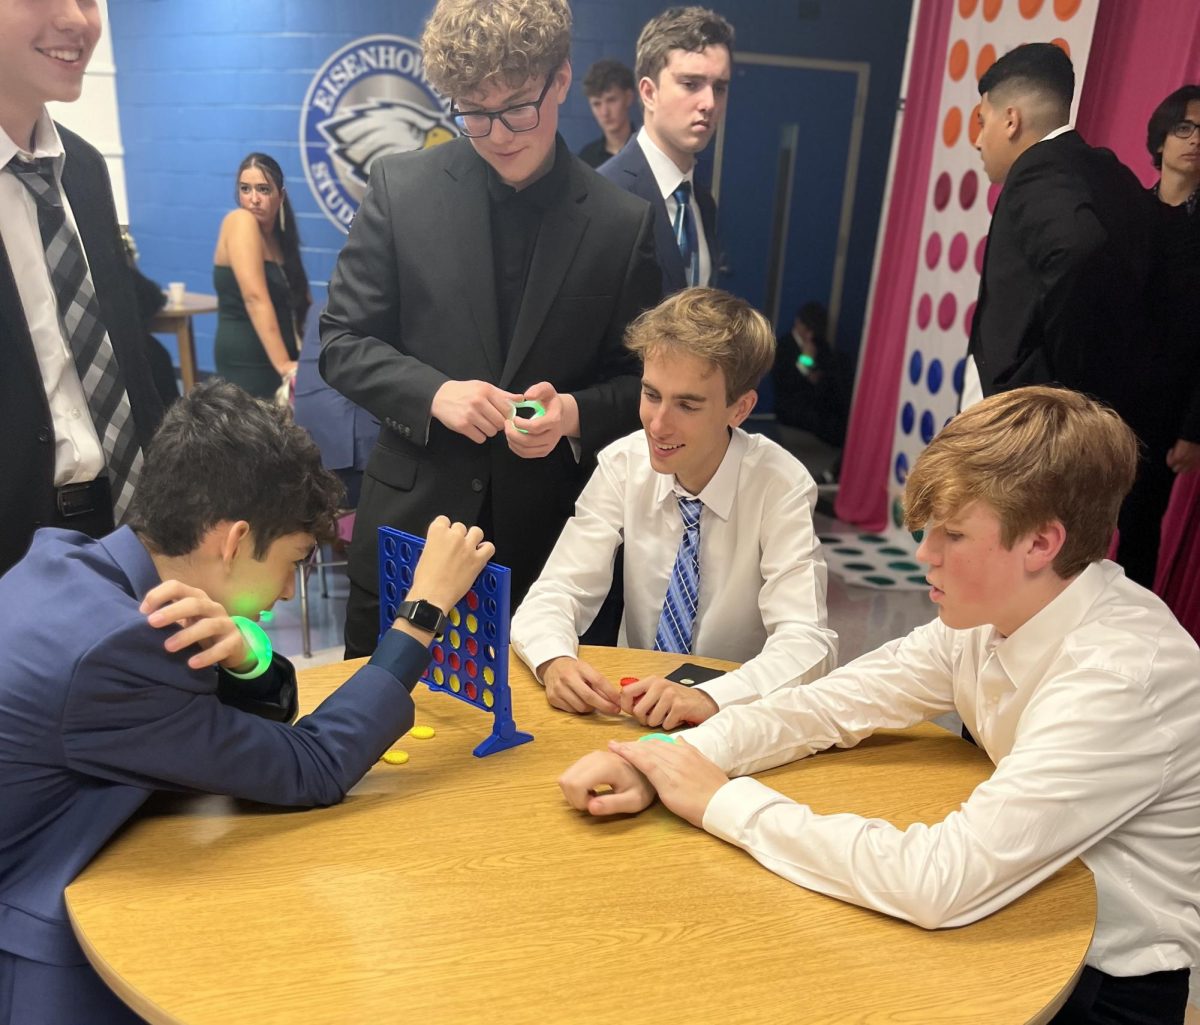 Connecting with connect 4. Stood in front of a game table, senior Cole Weinert watches his friends play connect 4. At the homecoming dance, Weinert spent time with his friends before they all went their separate ways. “I like spending quality time with everyone before life moves on,” Weinert said. 